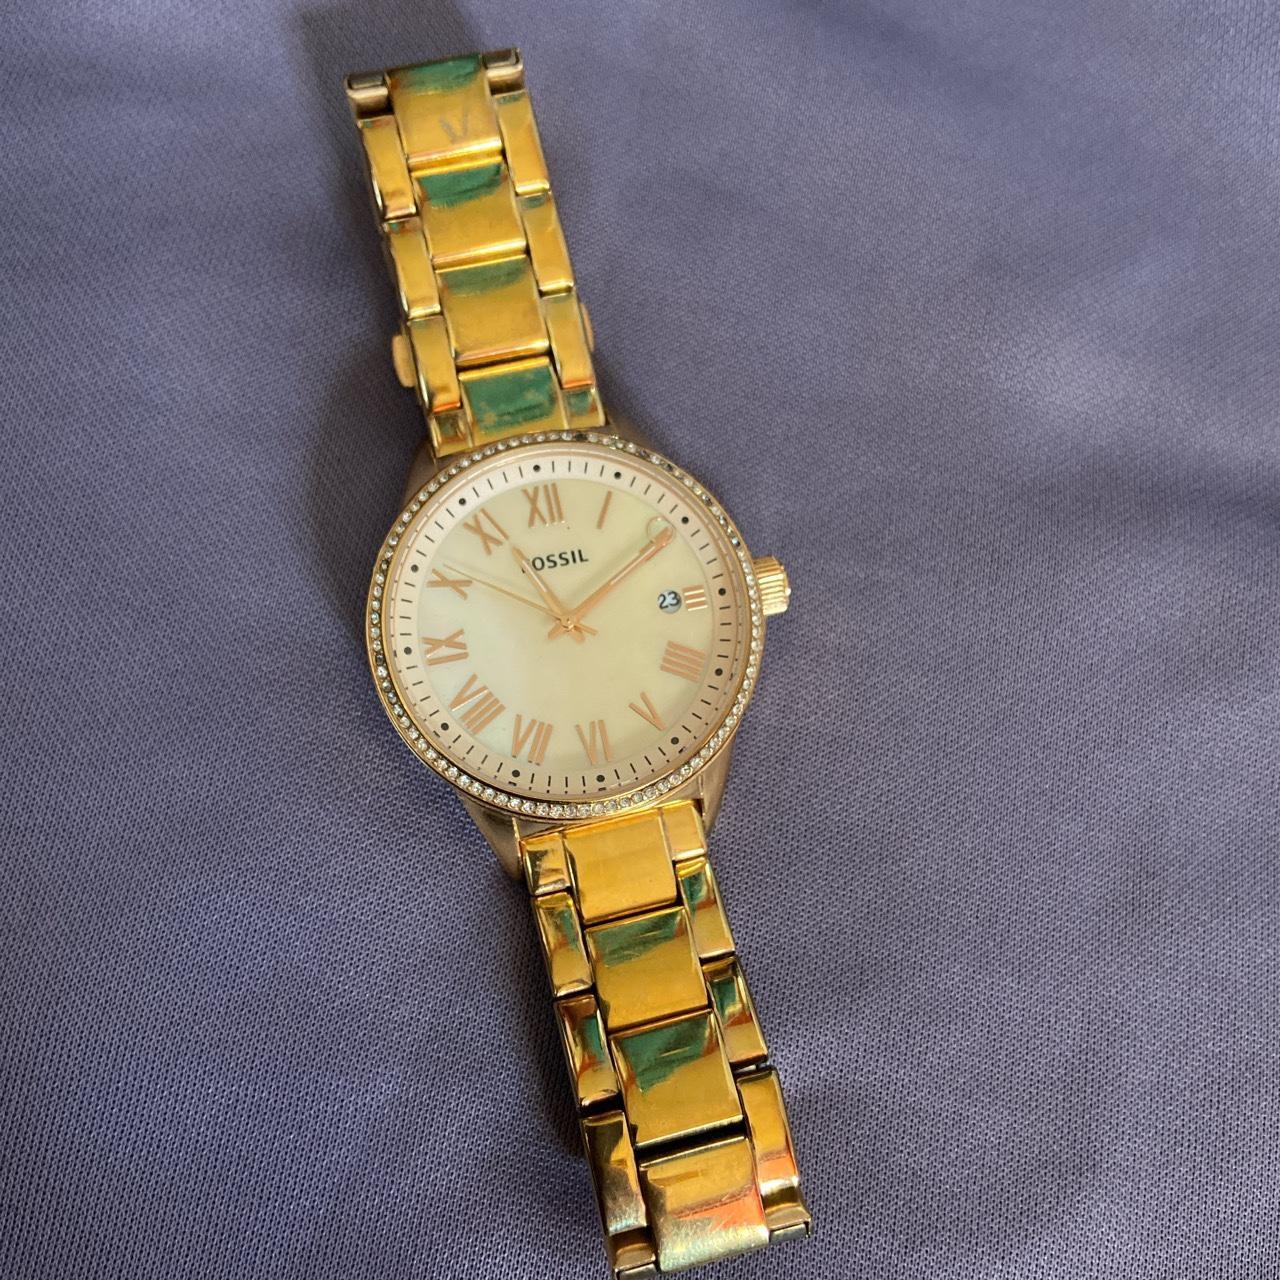 STUNNING ROSE GOLD COLOURED FOSSIL WATCH Retail... - Depop